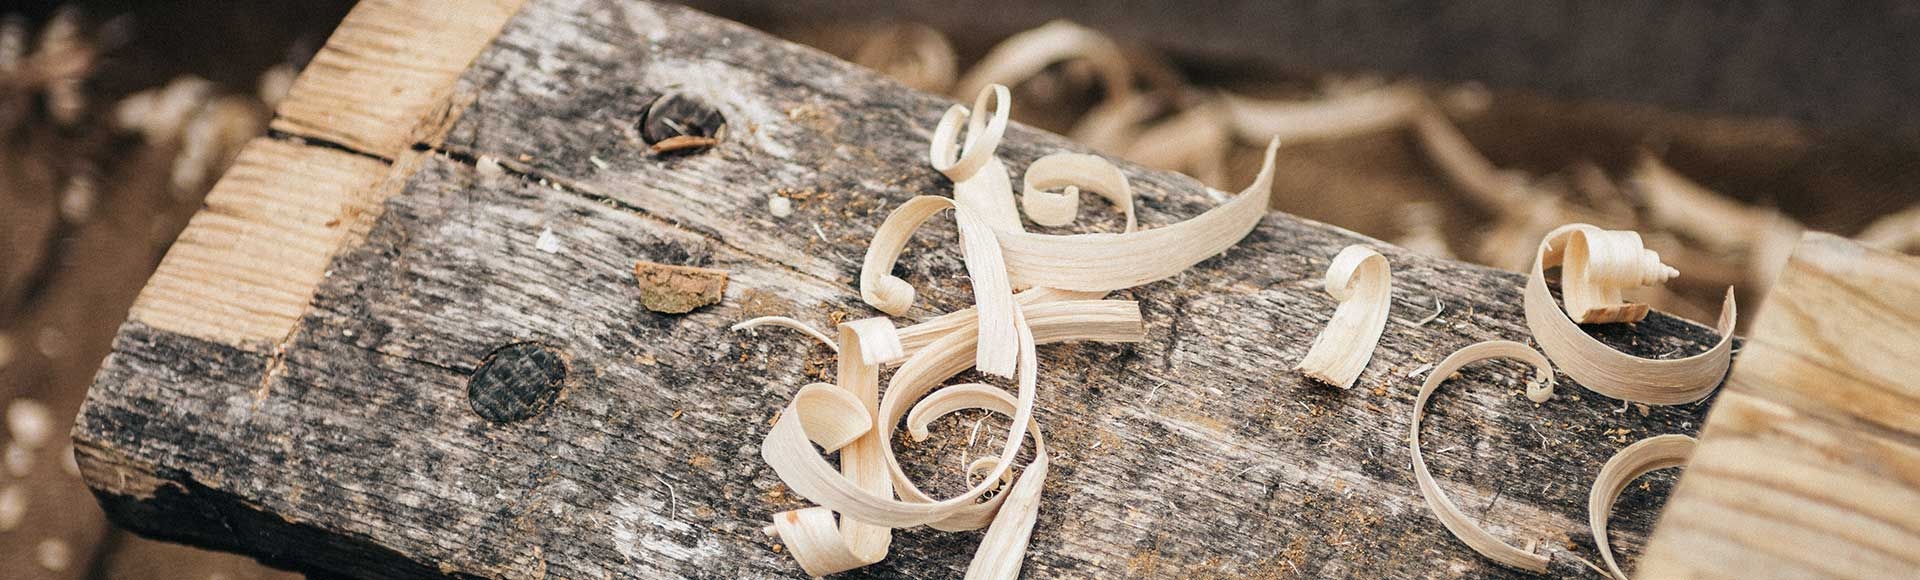 6 Amazing Hands-On Activities To Teach Your Kids Woodworking Skills